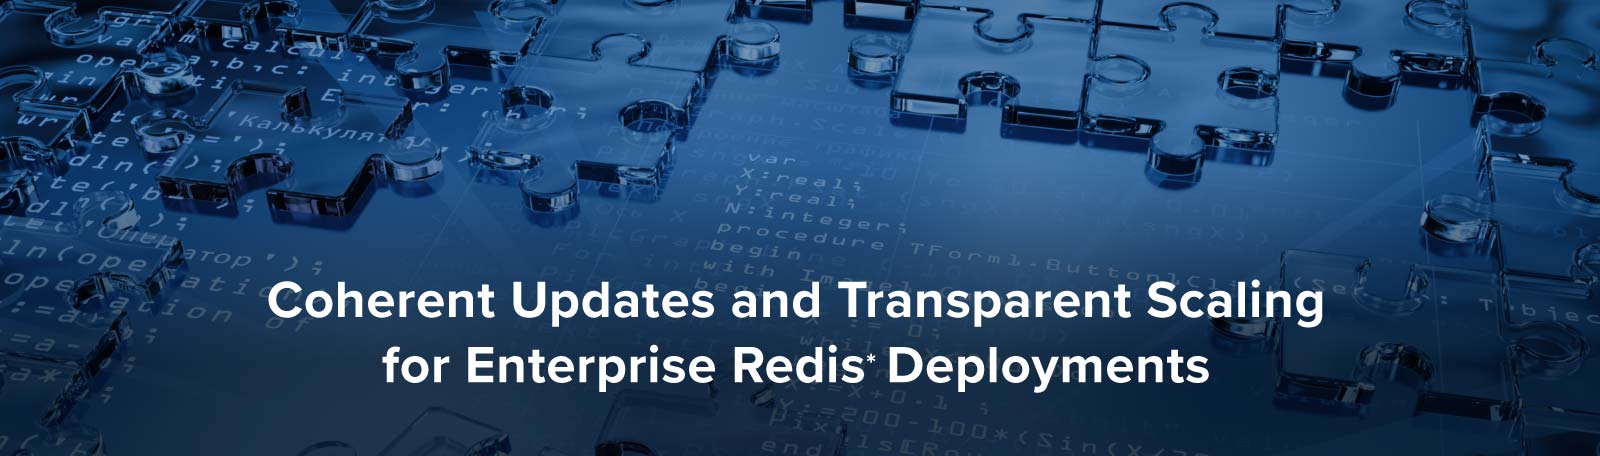 Coherent Updates and Transparent Scaling for Enterprise Redis Deployments